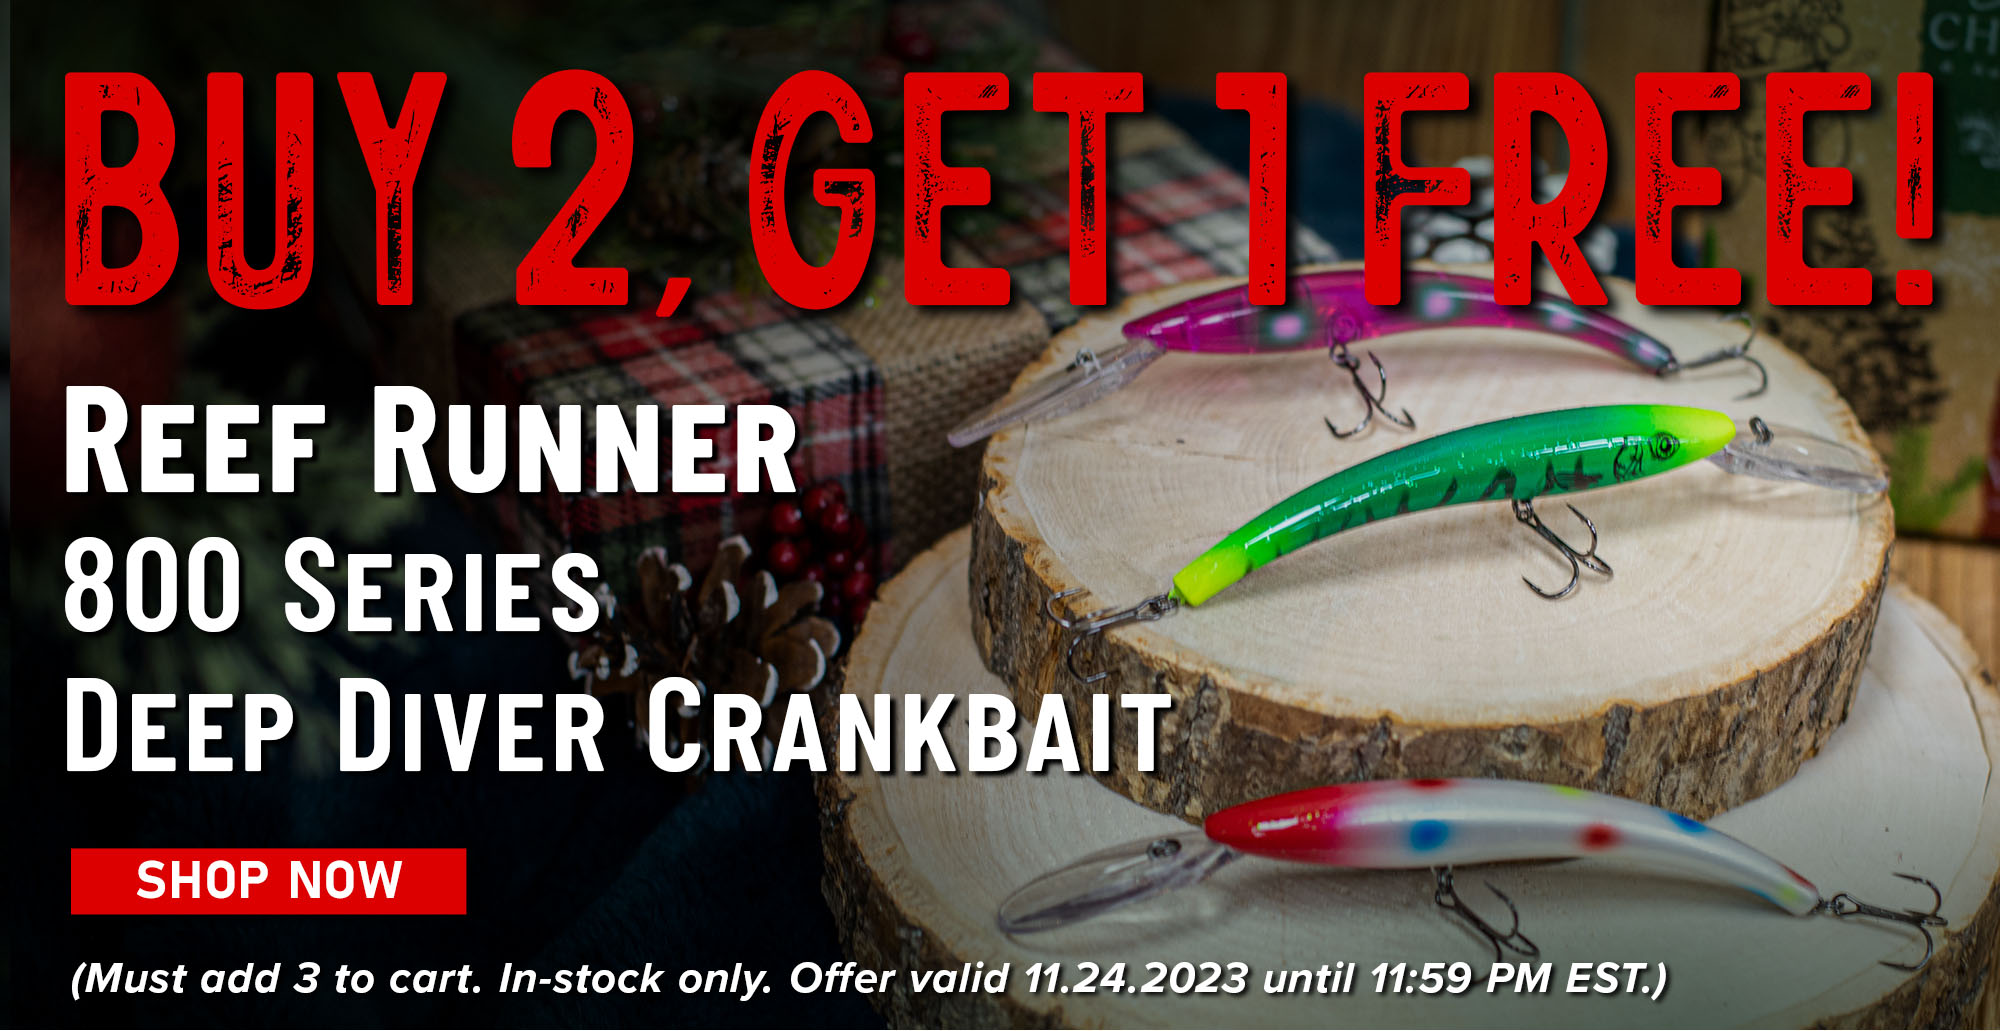 Buy 2, Get 1 Free! Reef Runner 800 Series Deep Diver Crankbait Shop Now (Must add 3 to cart. In-stock only. Offer valid 11.24.2023 until 11:59 PM EST.)